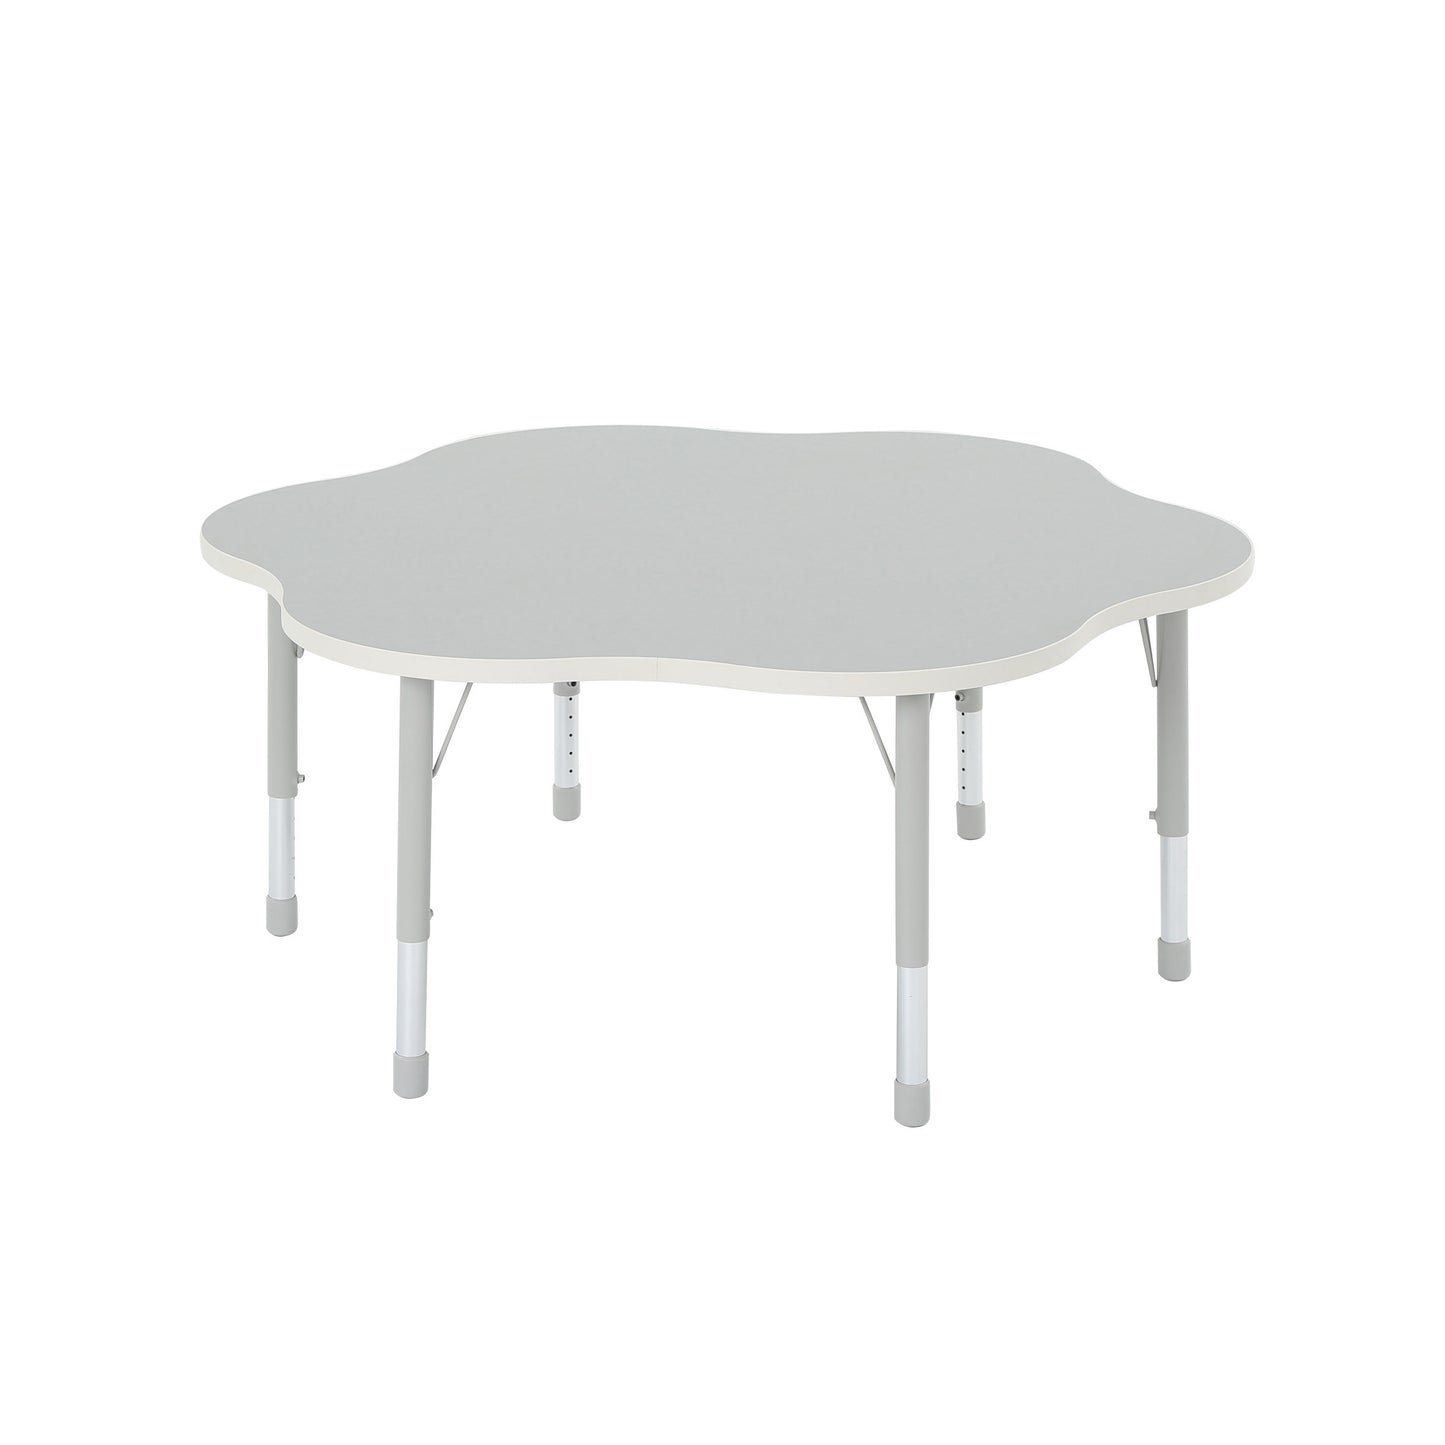 Thrifty Flower Table 6 Seater – Grey